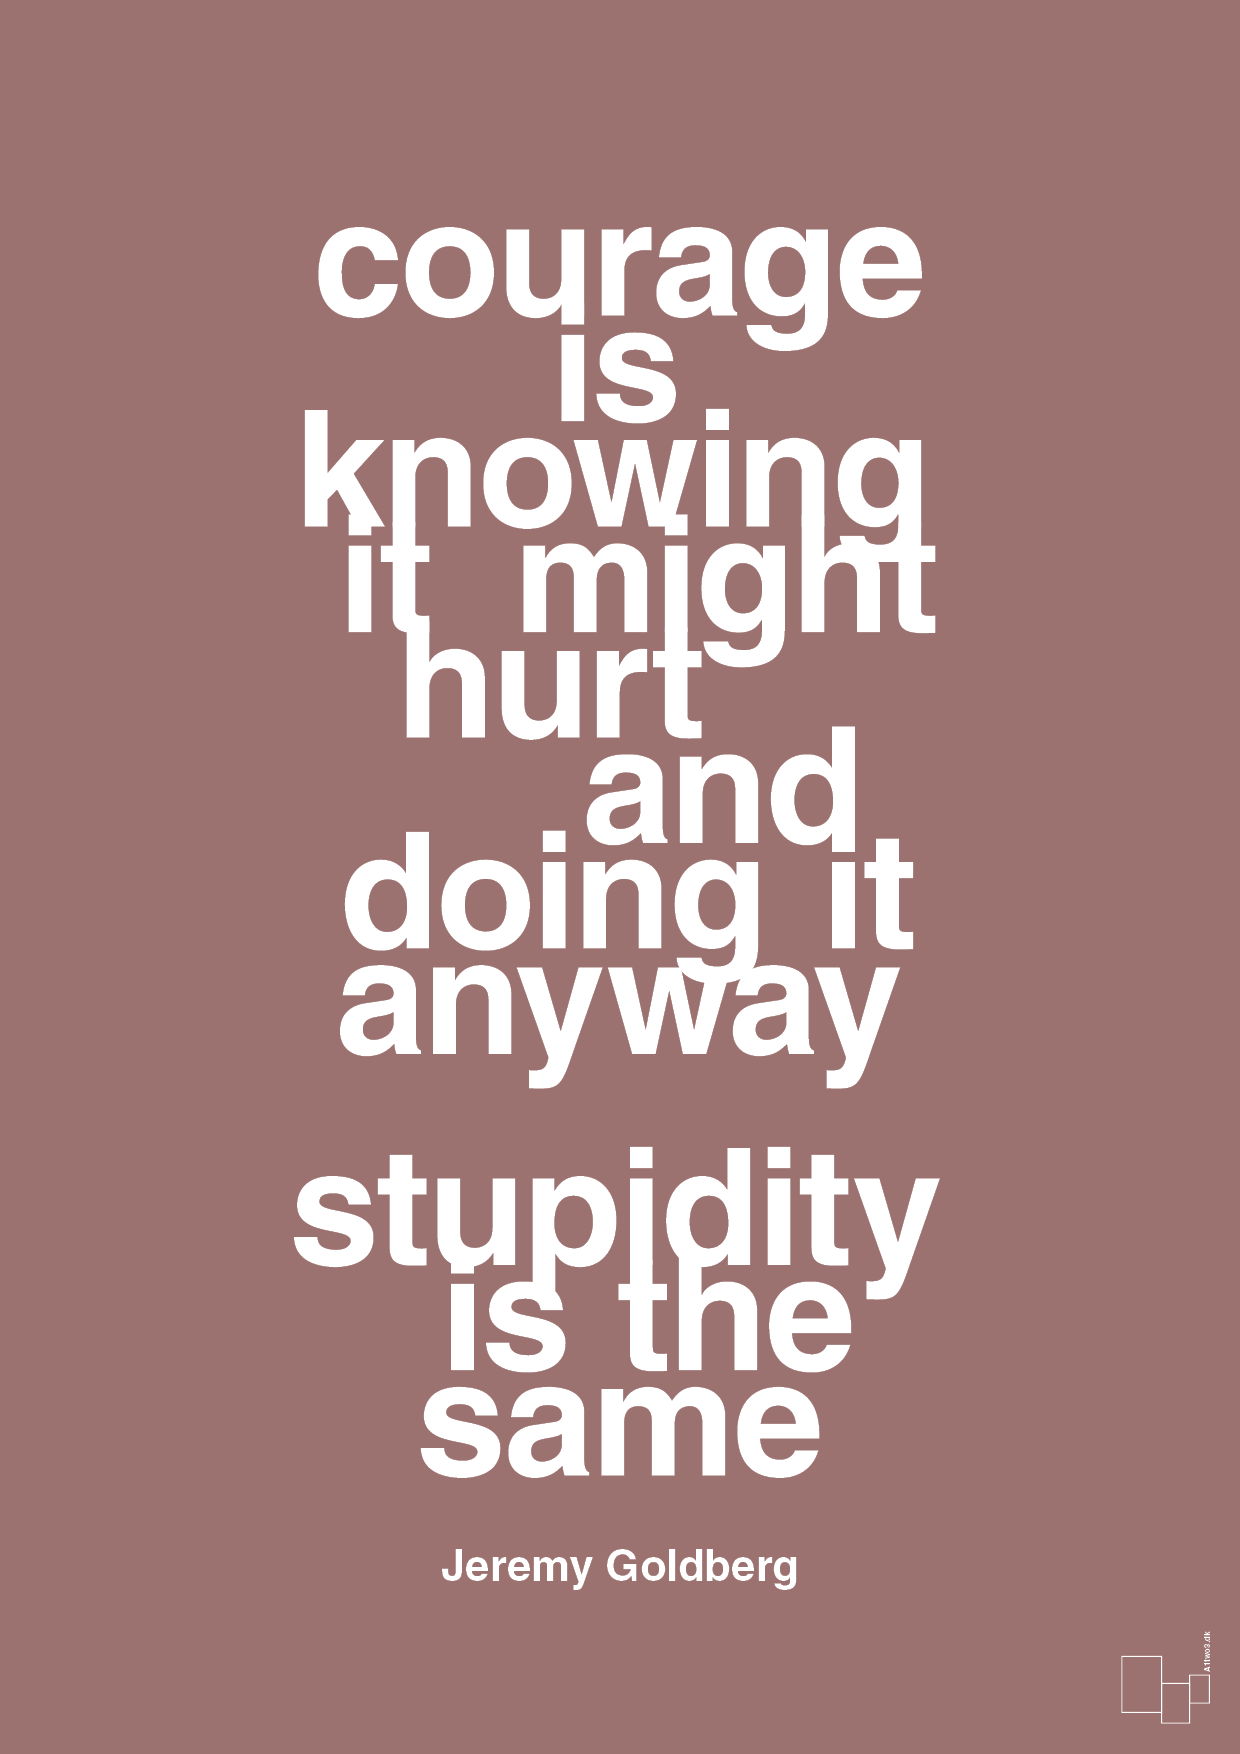 courage is knowing it might hurt and doing it anyway stupidity is the same - Plakat med Citater i Plum